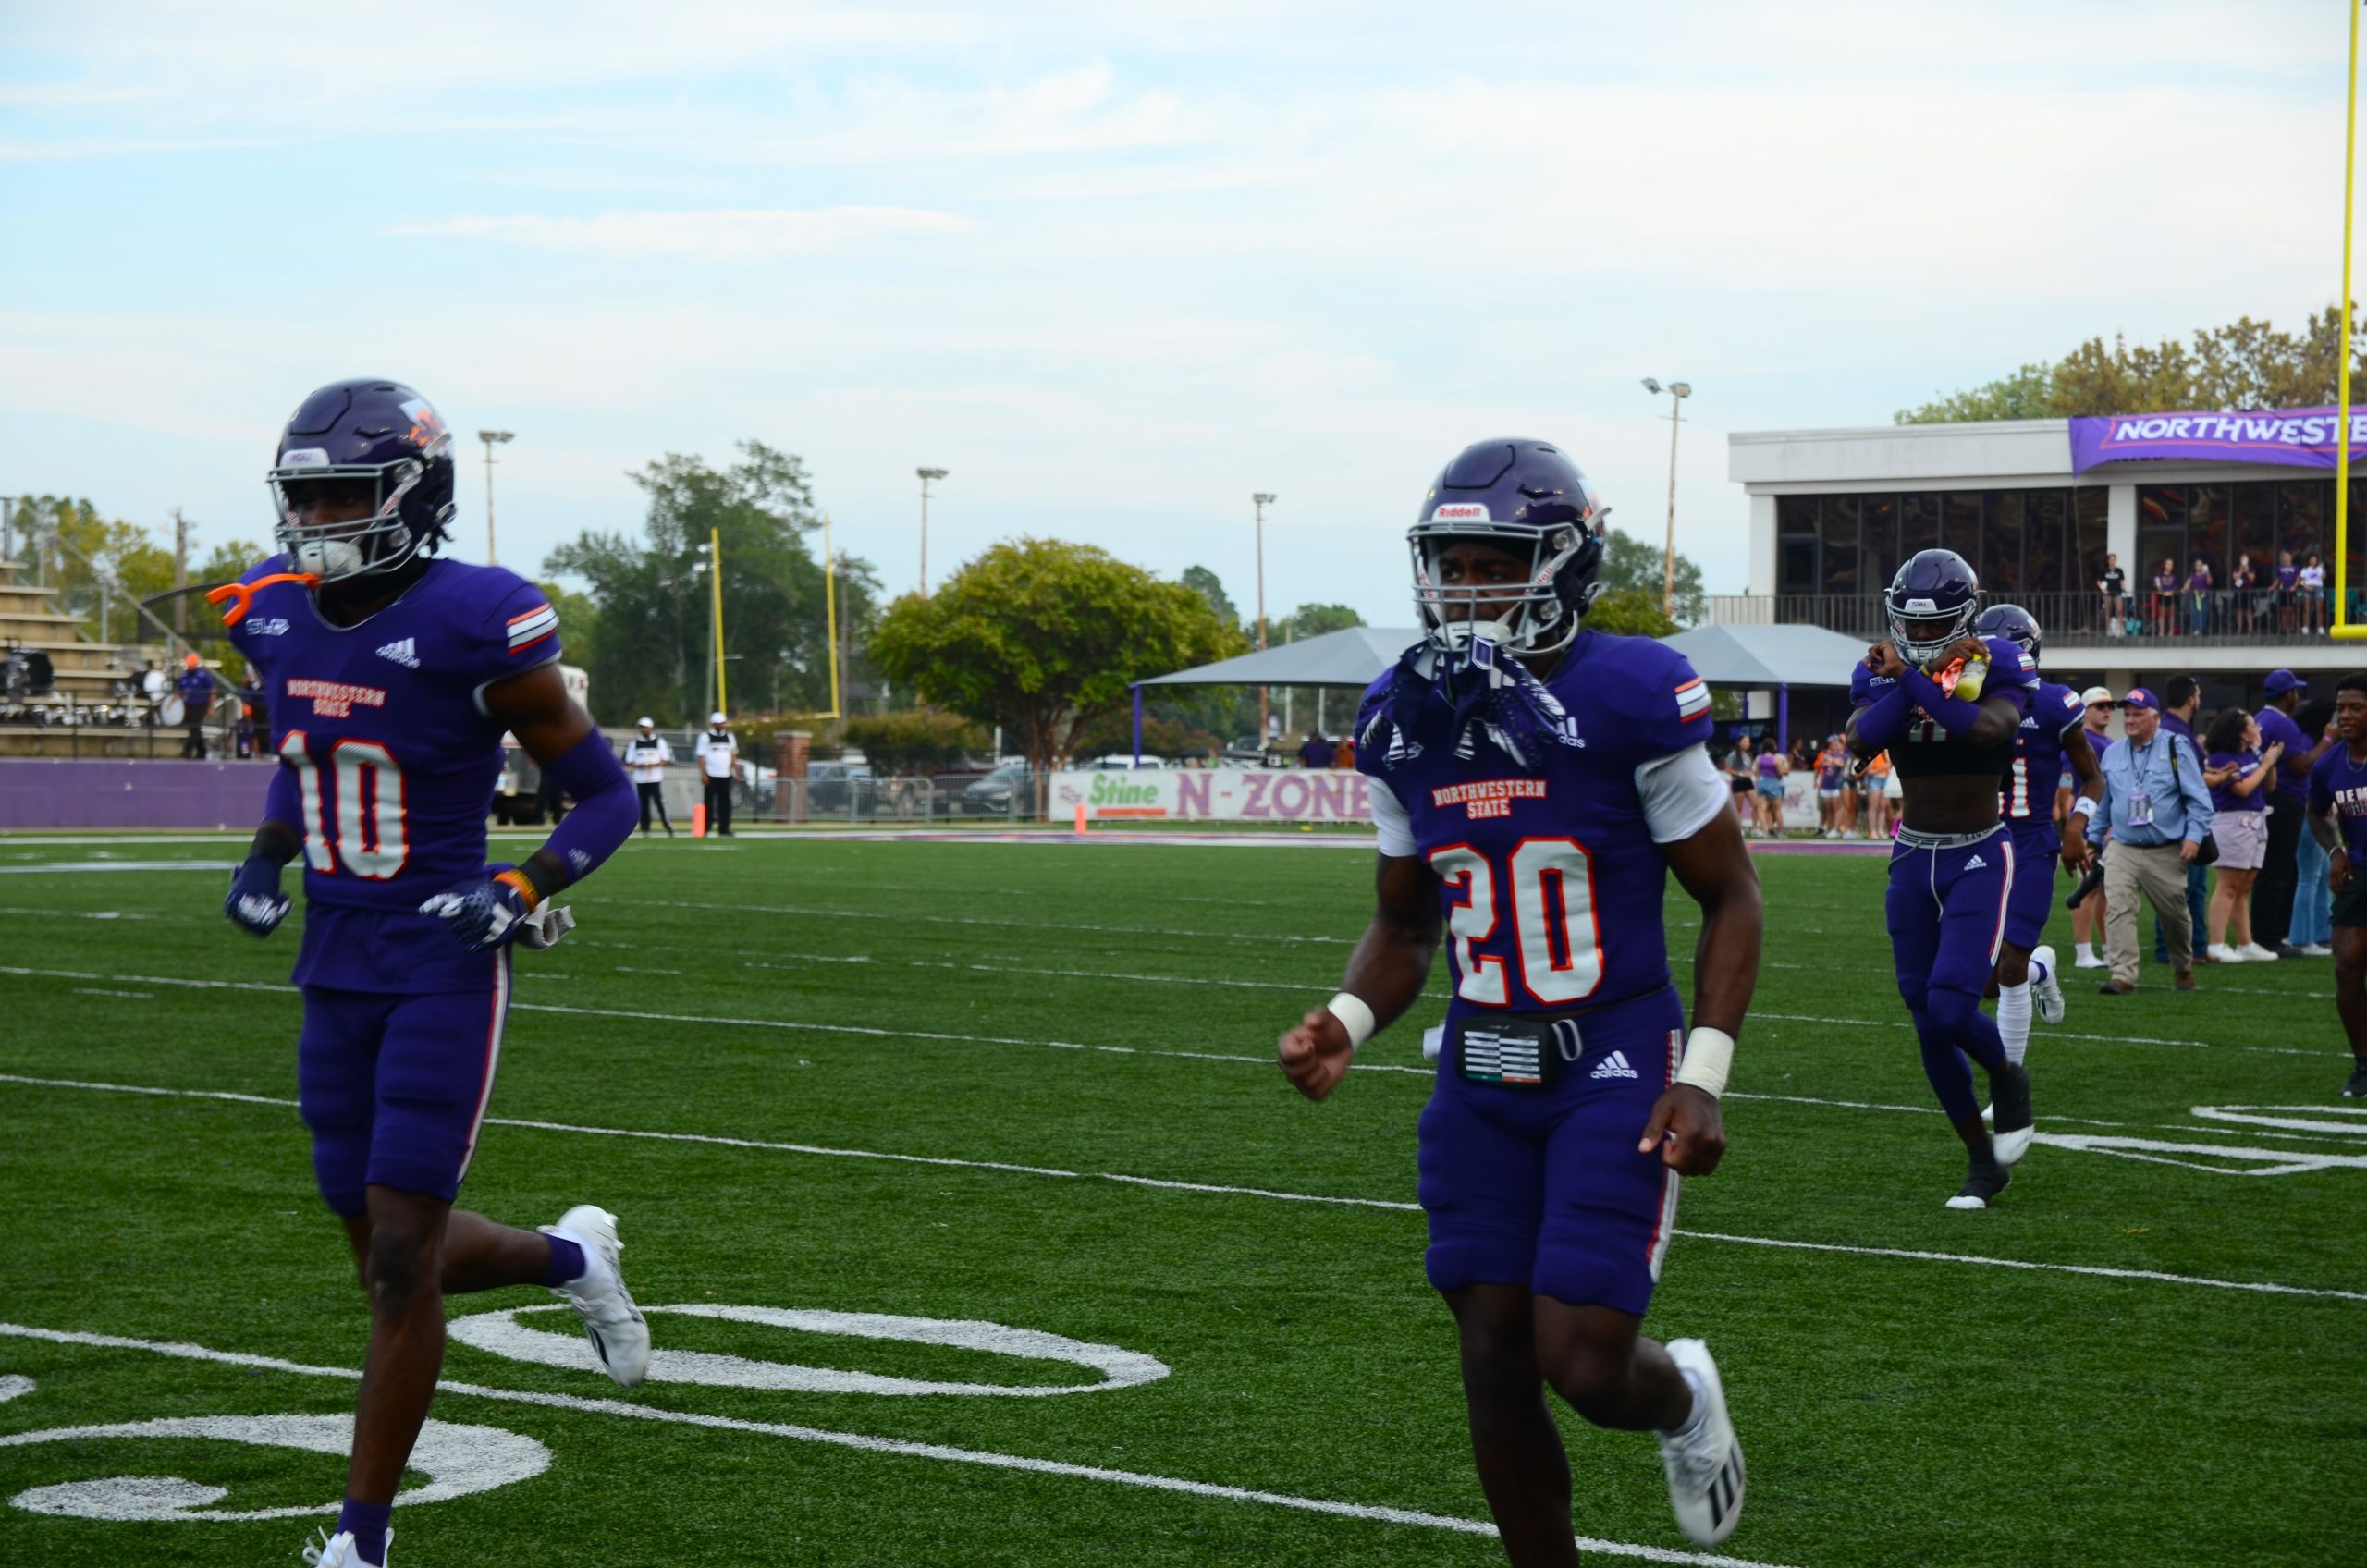 Unfortunately, the demons failed to pull through, losing 41-7 to Stephen F. Austin Lumberjacks in the home-opener.